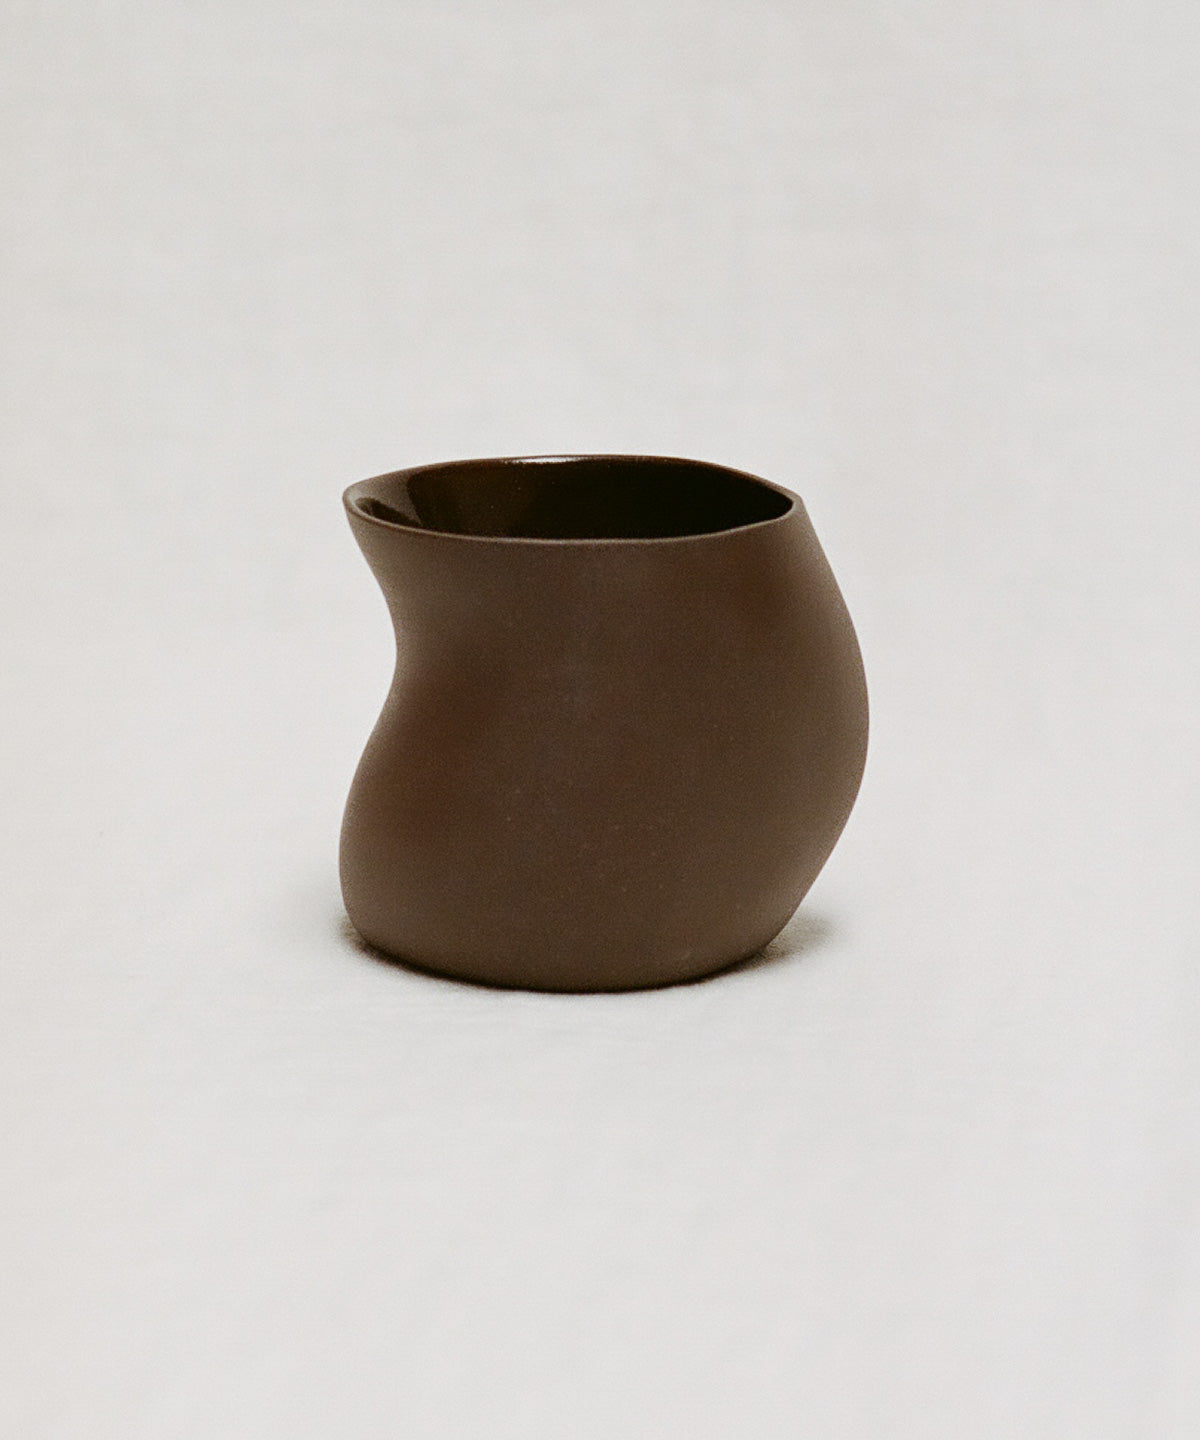 N°002 Cup with Curves